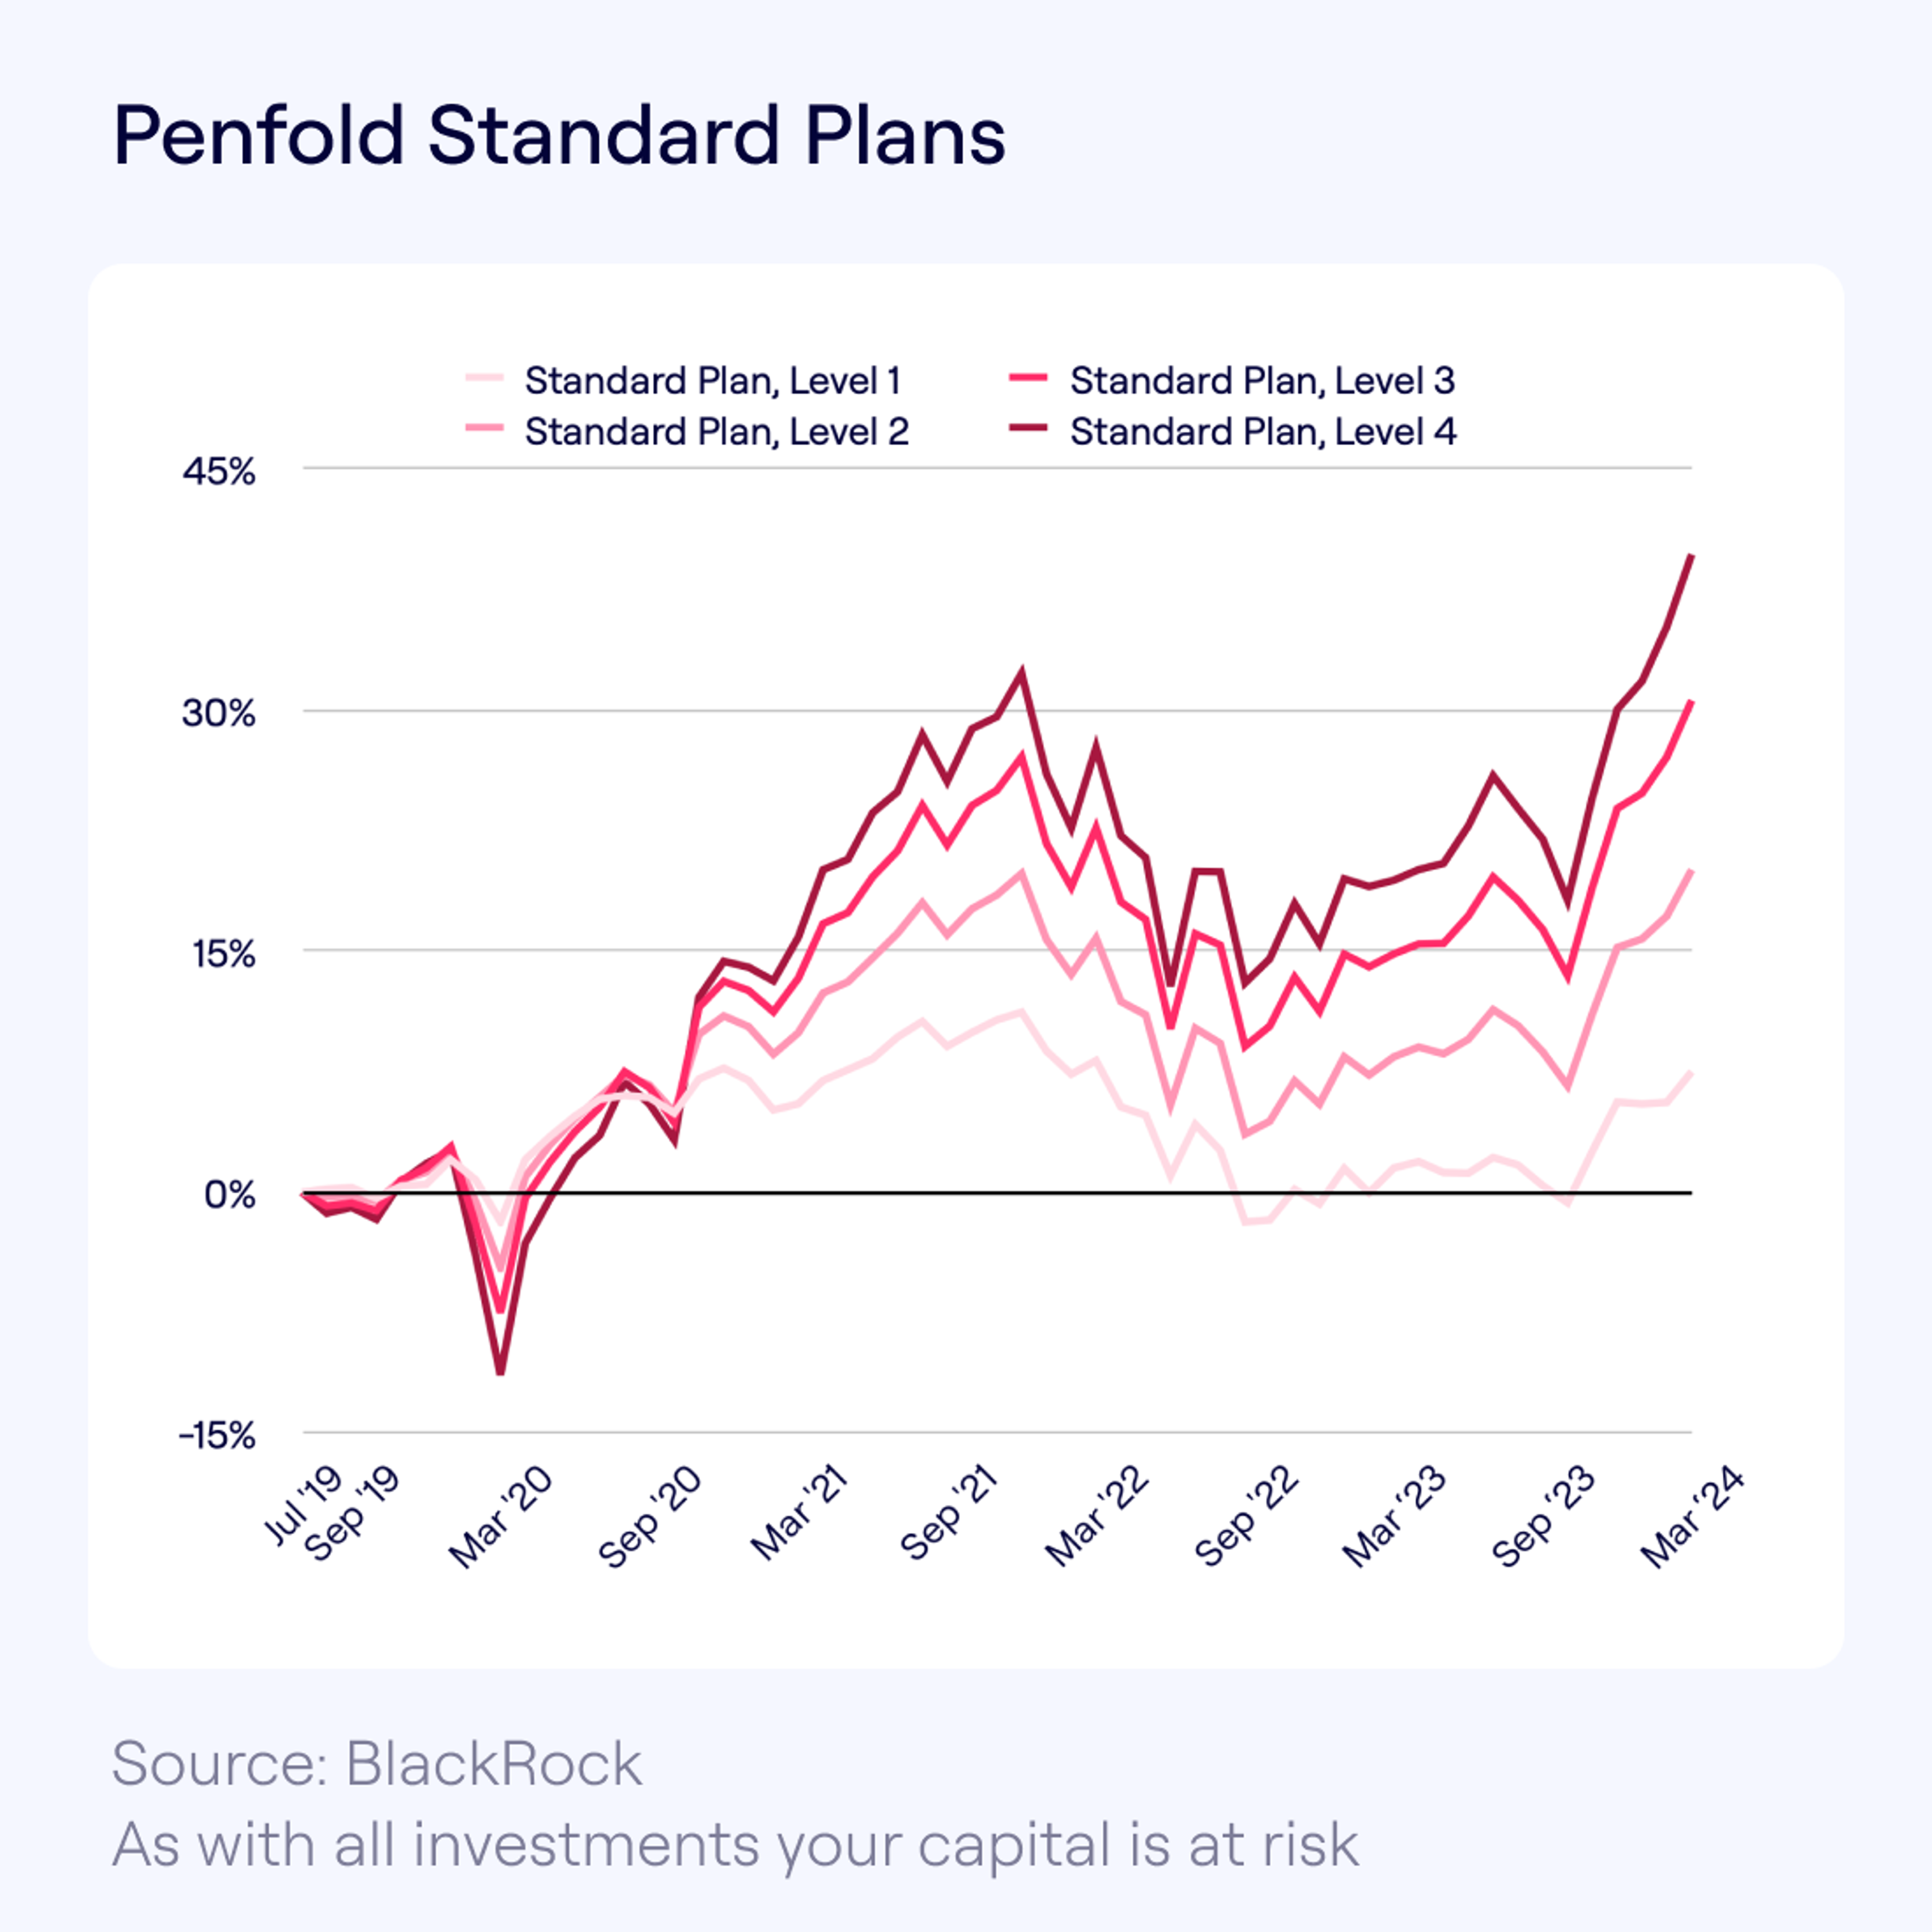 Line graph titled "Penfold Standard Plans," showing the performance of four levels of standard investment plans from July 2019 to March 2024. The lines depict fluctuations with a general upward trend in recent months.